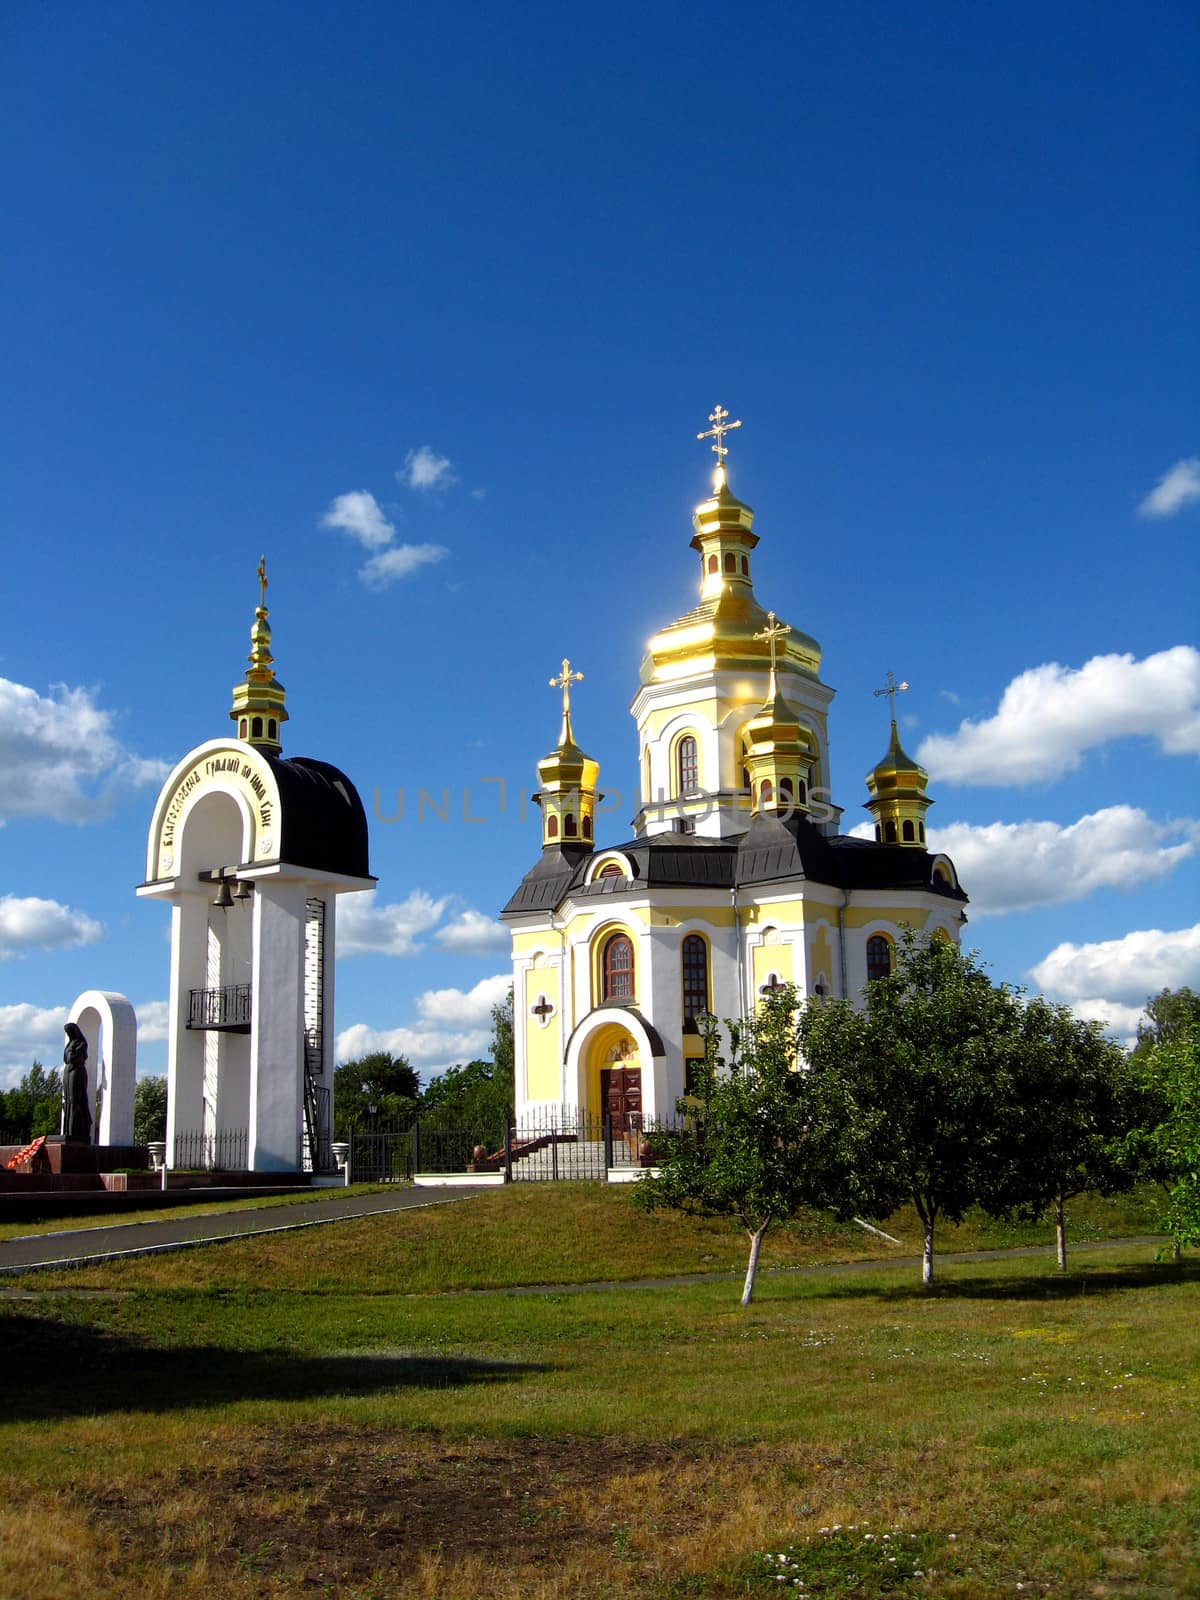 Beautiful church with golden domes by alexmak